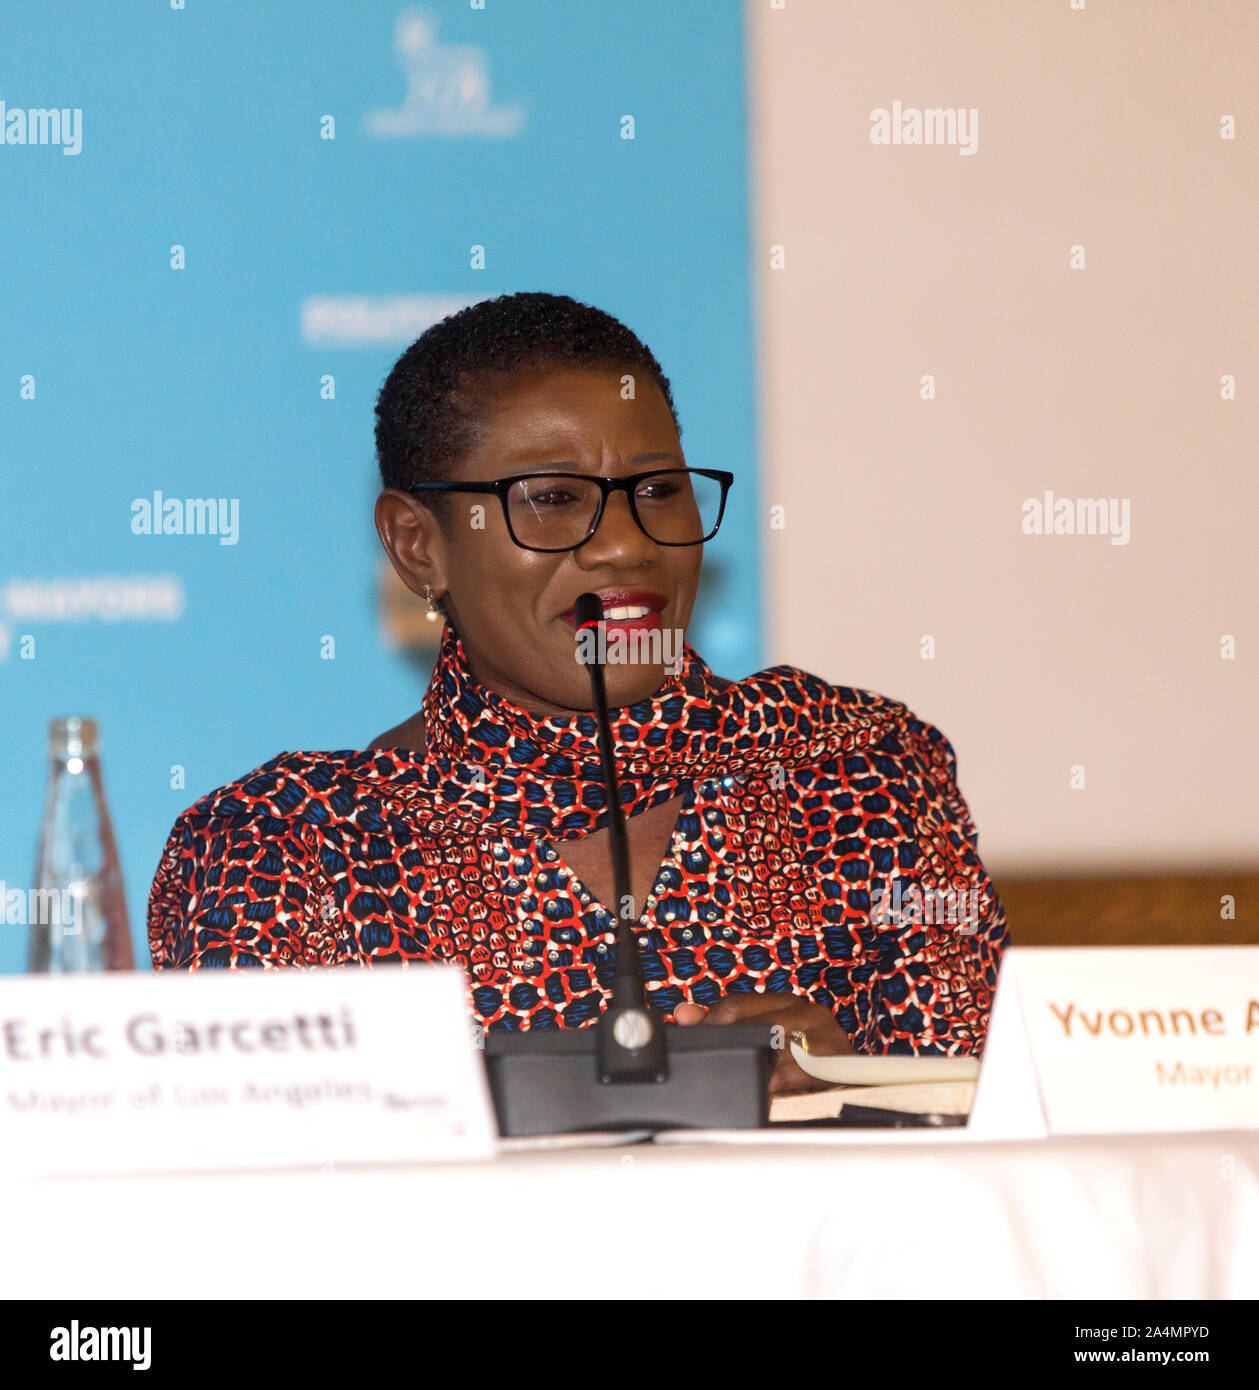 COPENHAGEN, DENMARK – OCTOBER 09, 2019: Yvonne Aki-Sawyerr, Mayor of Freetown, Sierre Leone, speaks during the C40 World Mayors Summit opening press conference at Copenhagen City Hall. More than 90 mayors of some of the world’s largest and most influential cities representing some 700 million people meet in CoCOPENHAGEN, DENMARK – OCTOBER 09, 2019: Yvonne Aki-Sawyerr, Mayor of Freetown, Sierre Leone, speaks during the C40 World Mayors Summit opening press conference at Copenhagen City Hall. More than 90 mayors of some of the world’s largest and most influential cities representing some 700 mil Stock Photo